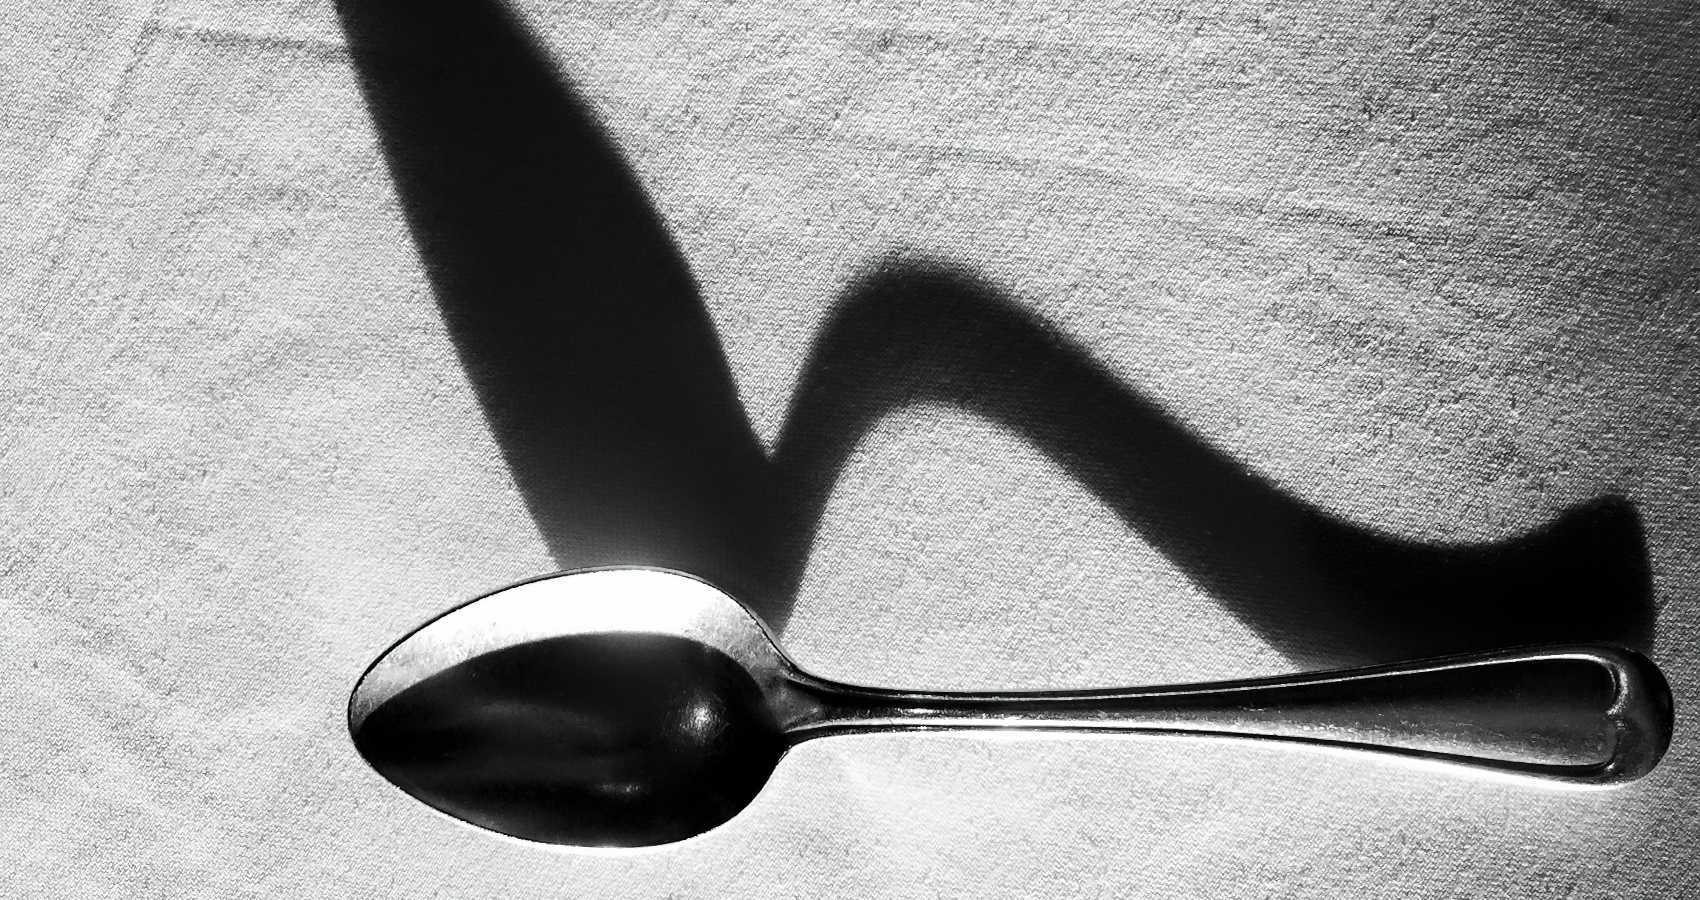 The Spoon, a short story by Kathy Whipple at Spillwords.com